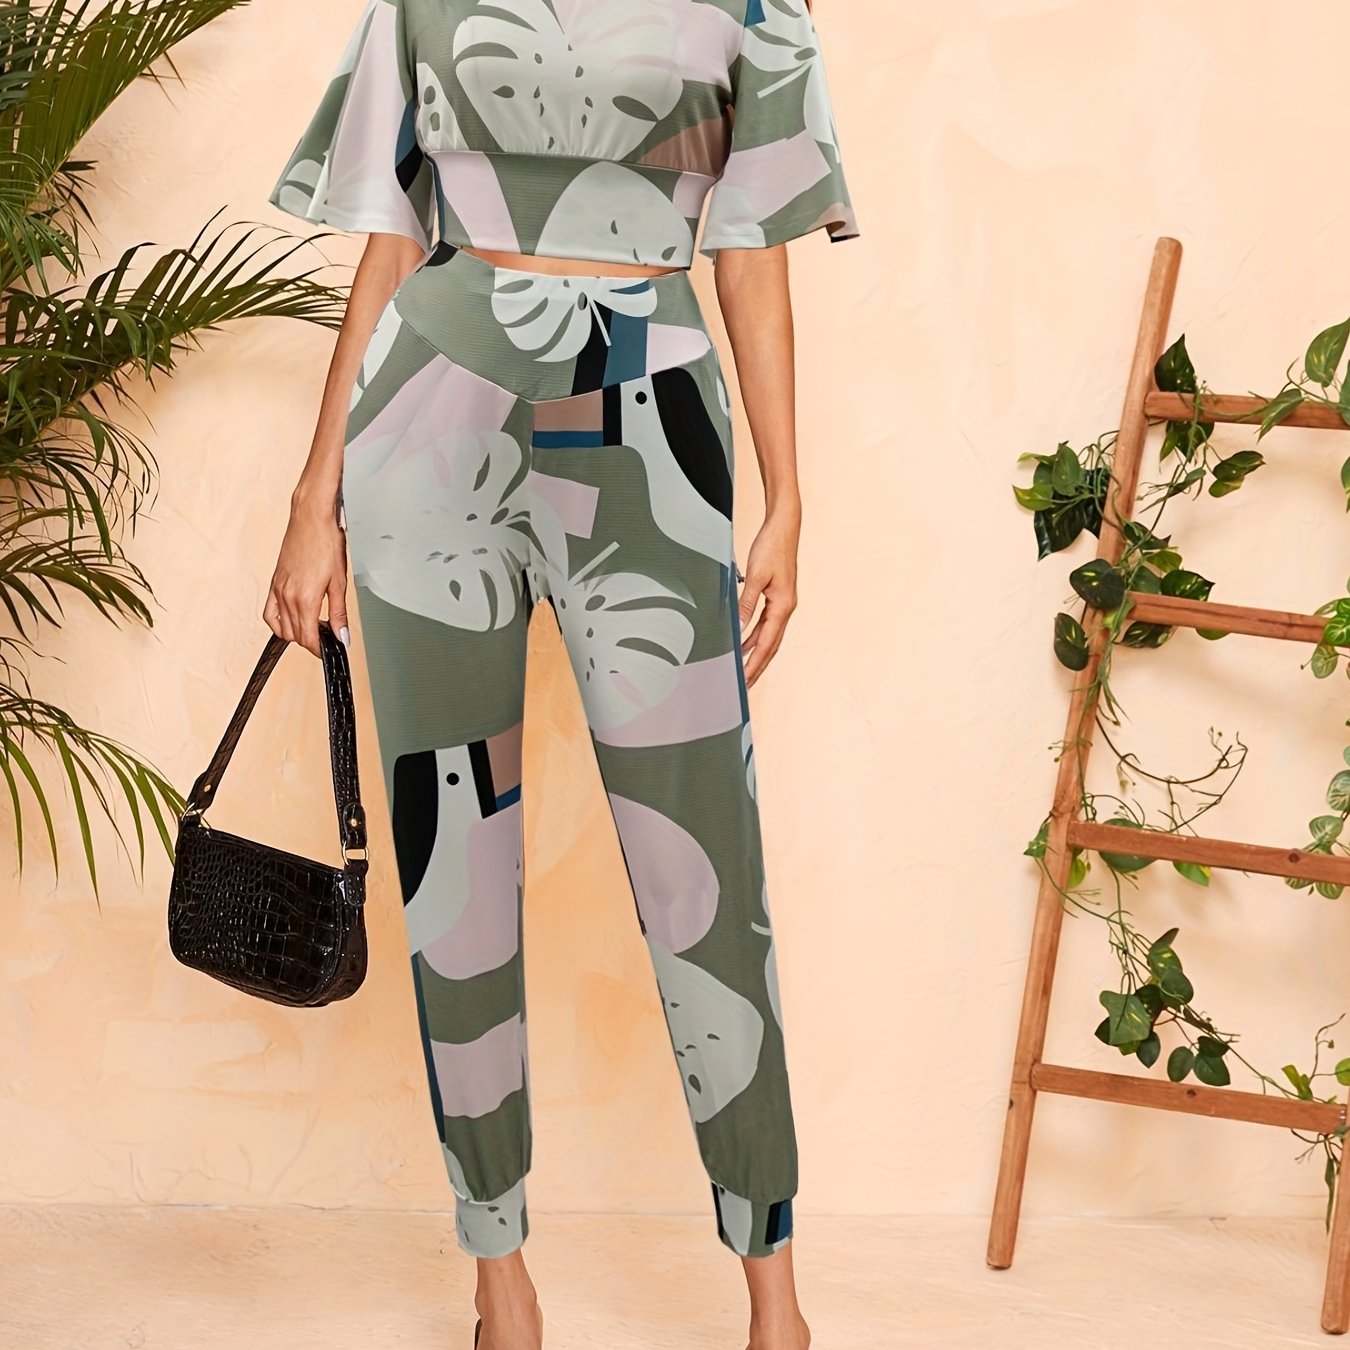 Antmvs Leaf Print Casual Two-piece Set, Bell Sleeve Crop Top & High Waist Slim Pants Outfits, Women's Clothing